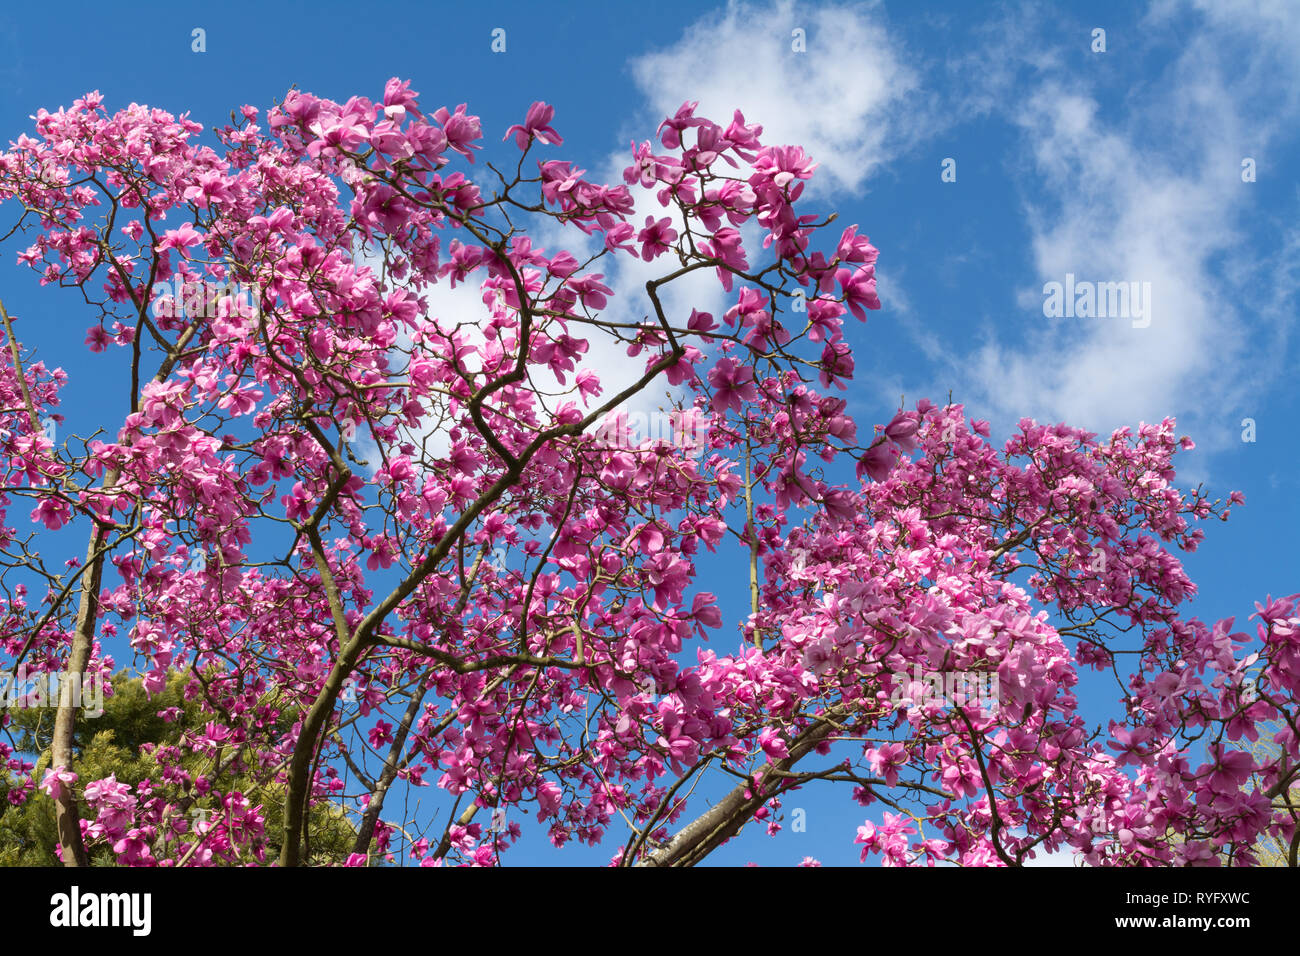 Magnolia sprengeri 'Lanhydrock' tree with beautiful bright pink blossom flowering during March in an English garden Stock Photo